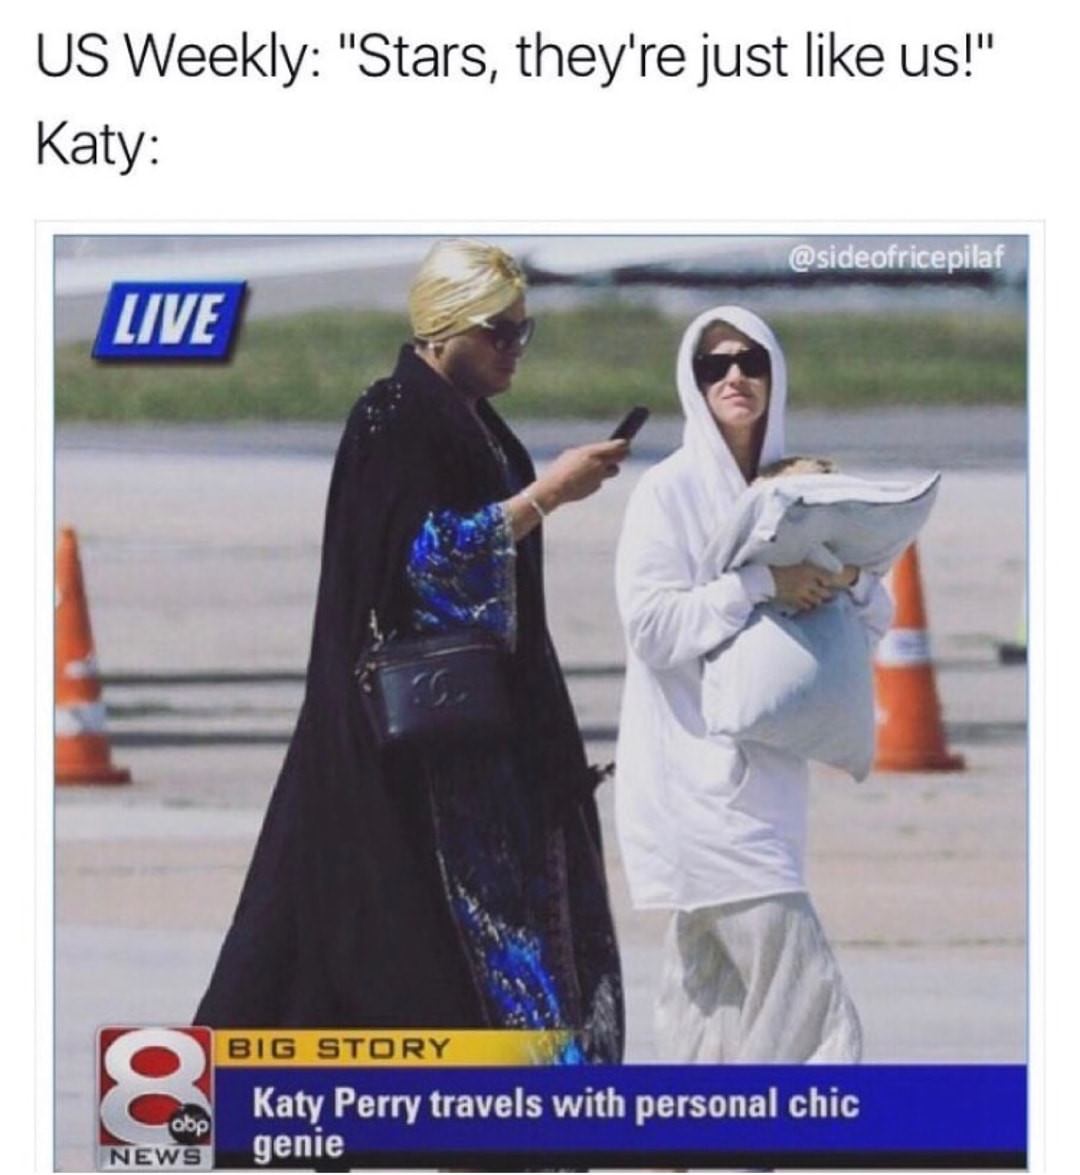 photo caption - Us Weekly "Stars, they're just us!" Katy Live Big Story Katy Perry travels with personal chic genie obp News